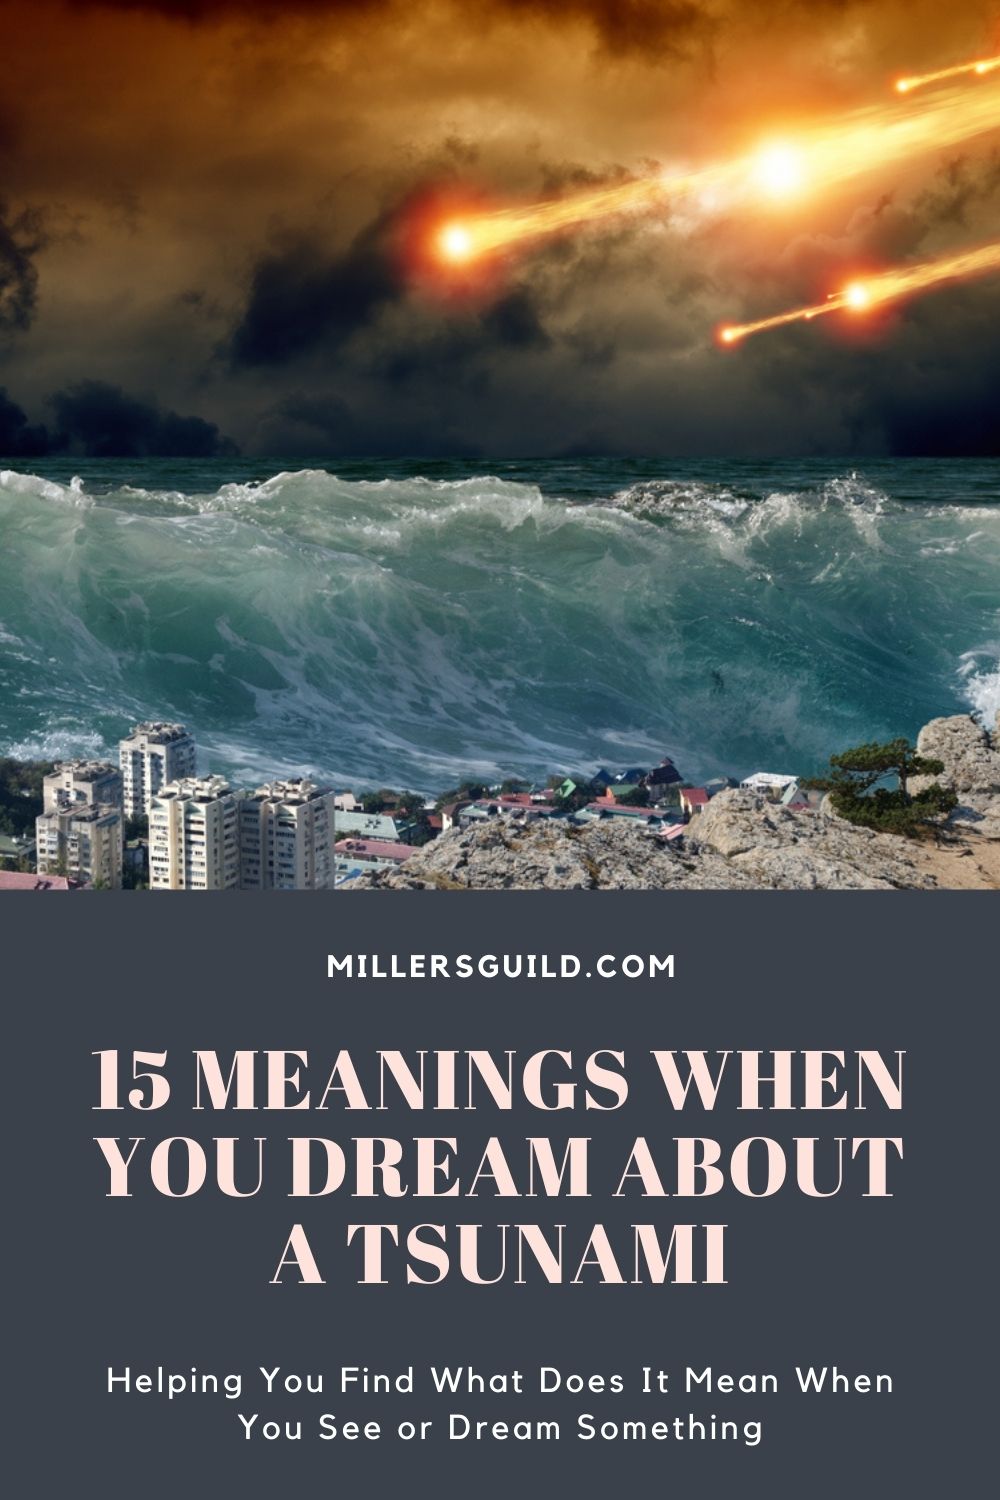 15 Meanings When You Dream About a Tsunami 2